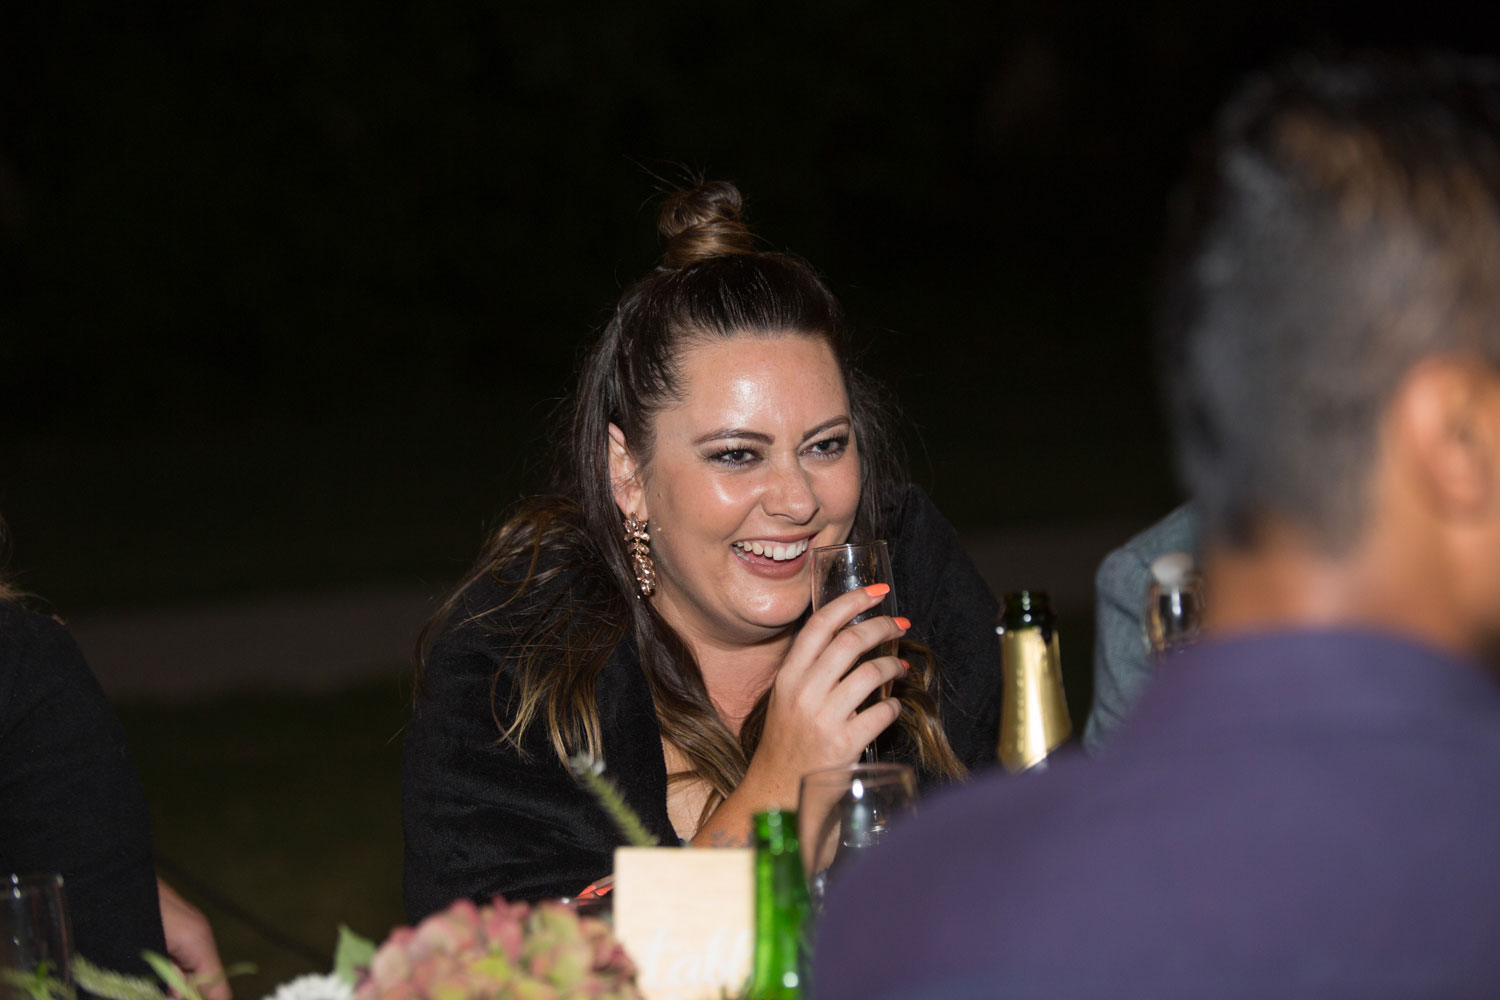 auckland wedding guest laughing hard